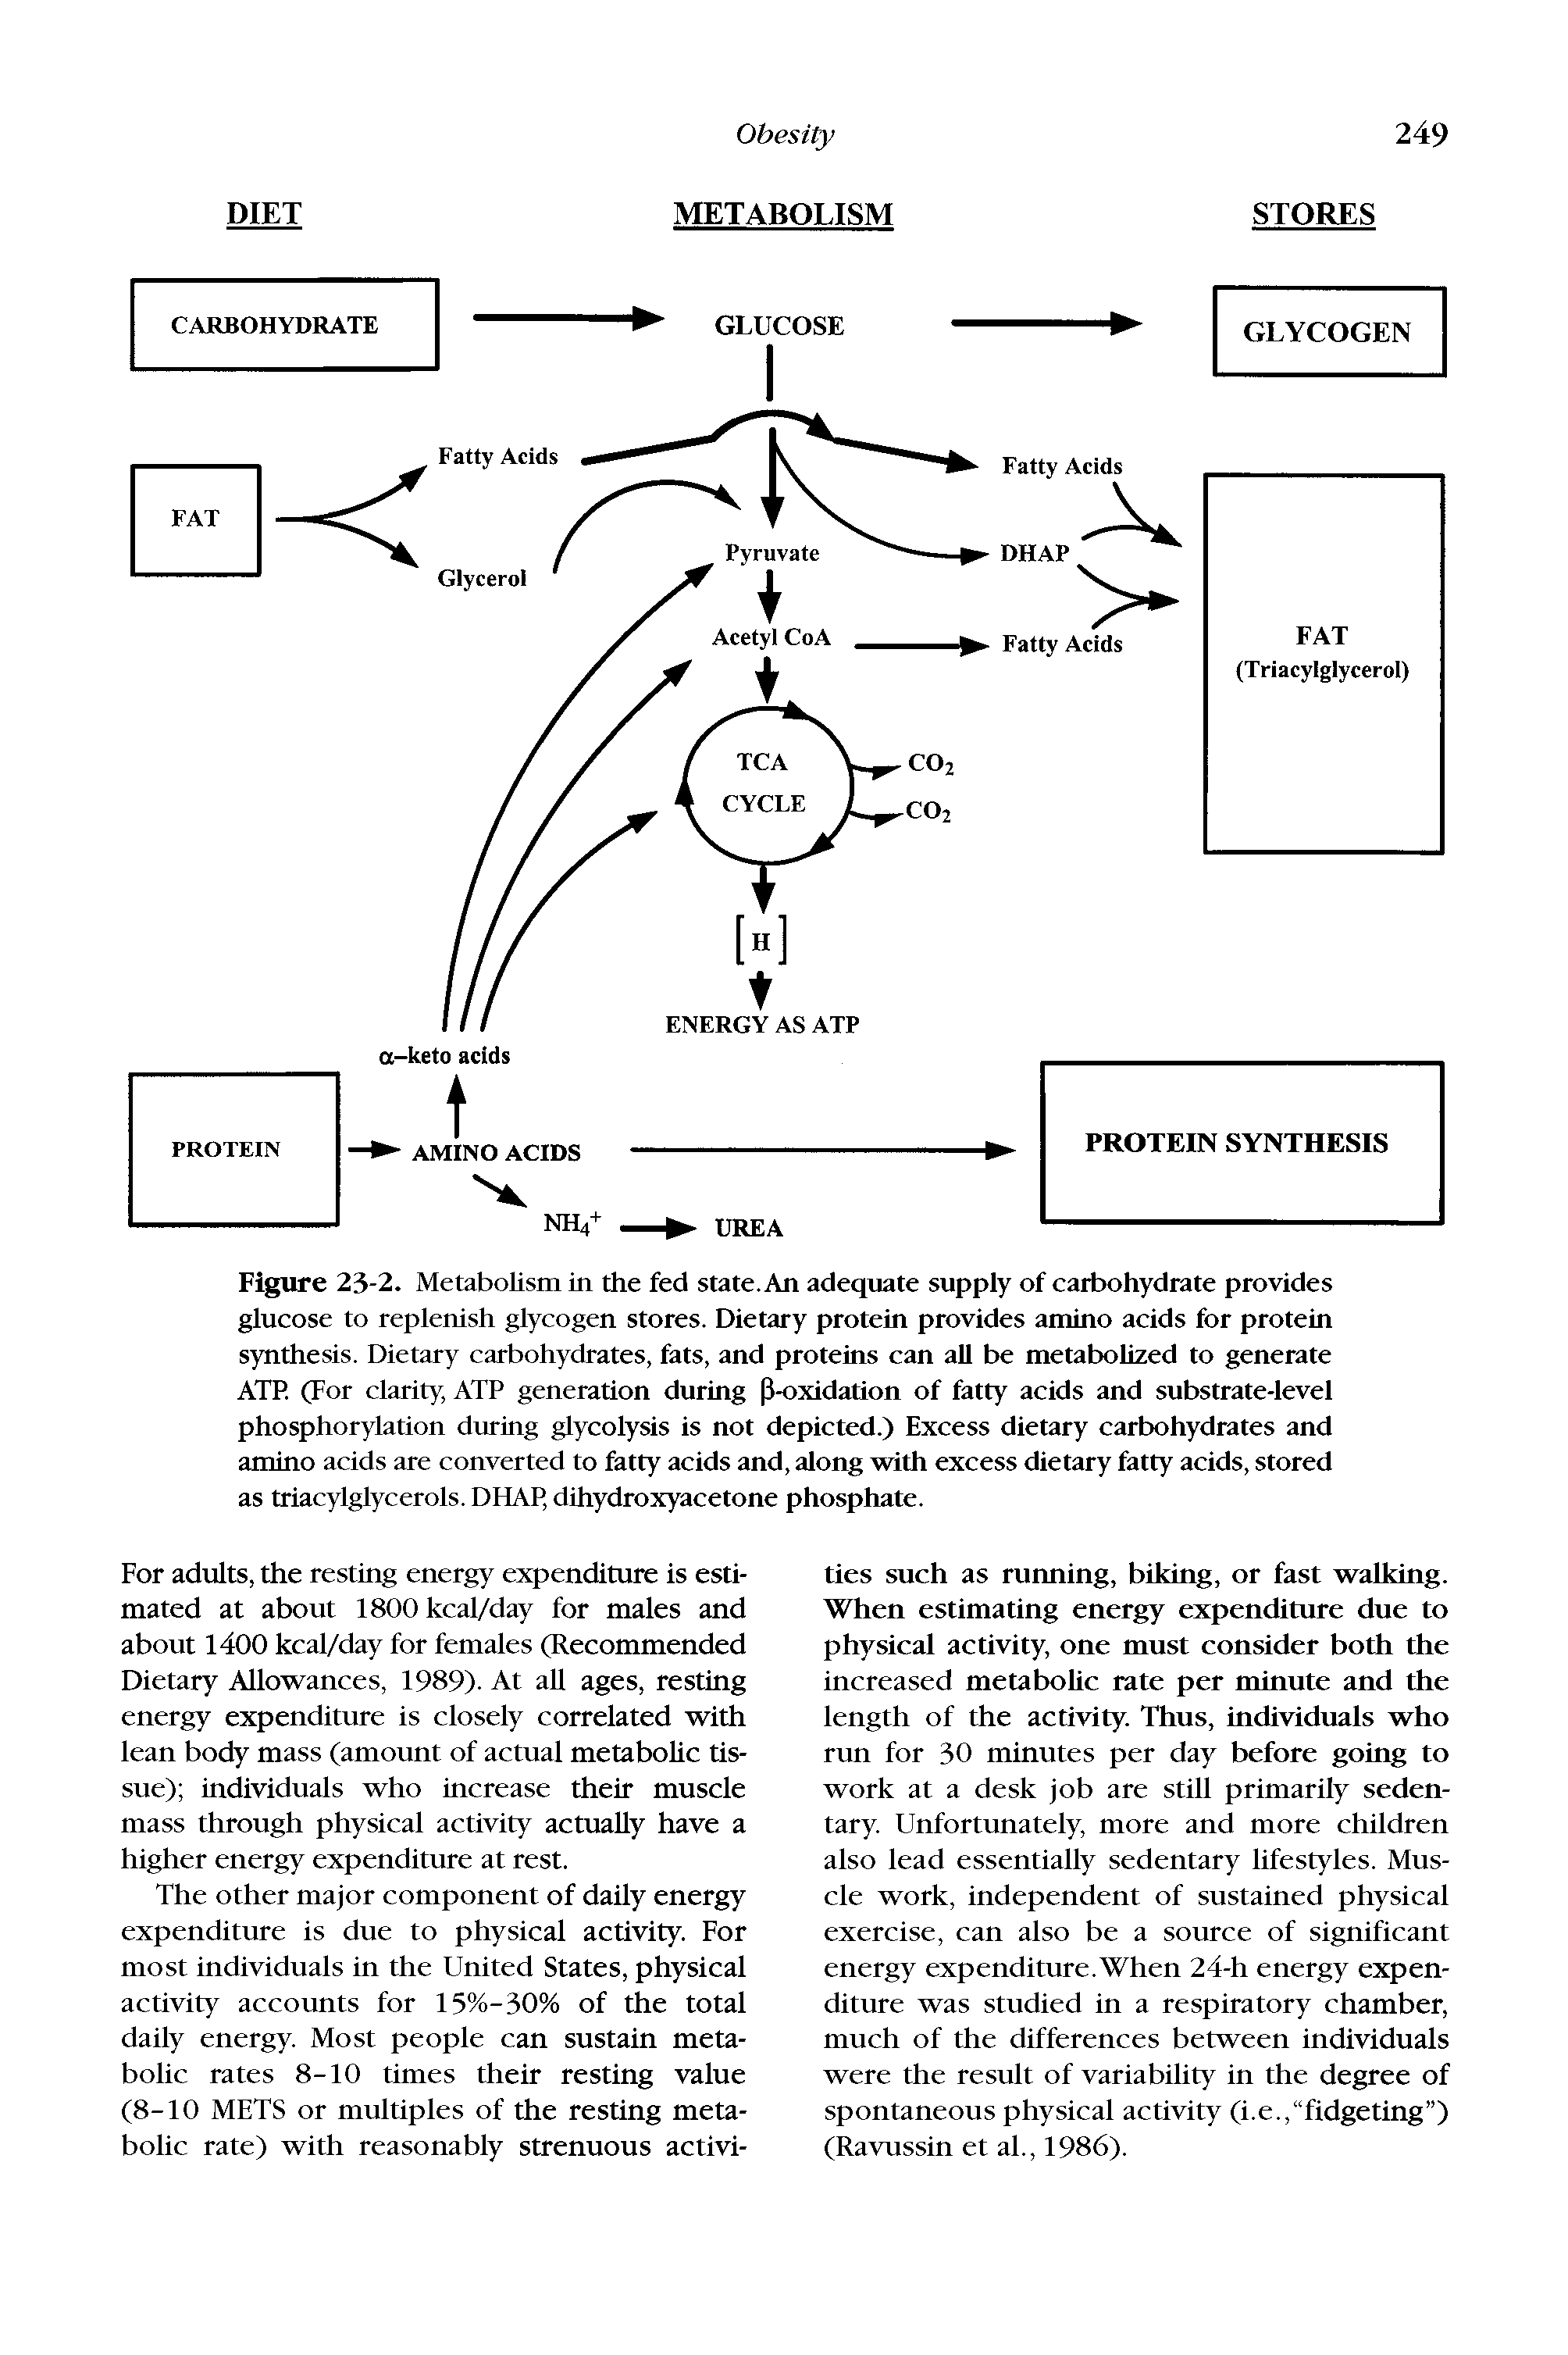 Figure 23-2. Metabolism in the fed state. An adequate supply of carbohydrate provides glucose to replenish glycogen stores. Dietary protein provides amino acids for protein synthesis. Dietary carbohydrates, fats, and proteins can all be metabolized to generate ATP. (For clarity, ATP generation during P-oxidation of fatty acids and substrate-level phosphorylation during glycolysis is not depicted.) Excess dietary carbohydrates and amino acids are converted to fatty acids and, along with excess dietary fatty acids, stored as triacylglycerols. DHAP, dihydroxyacetone phosphate.